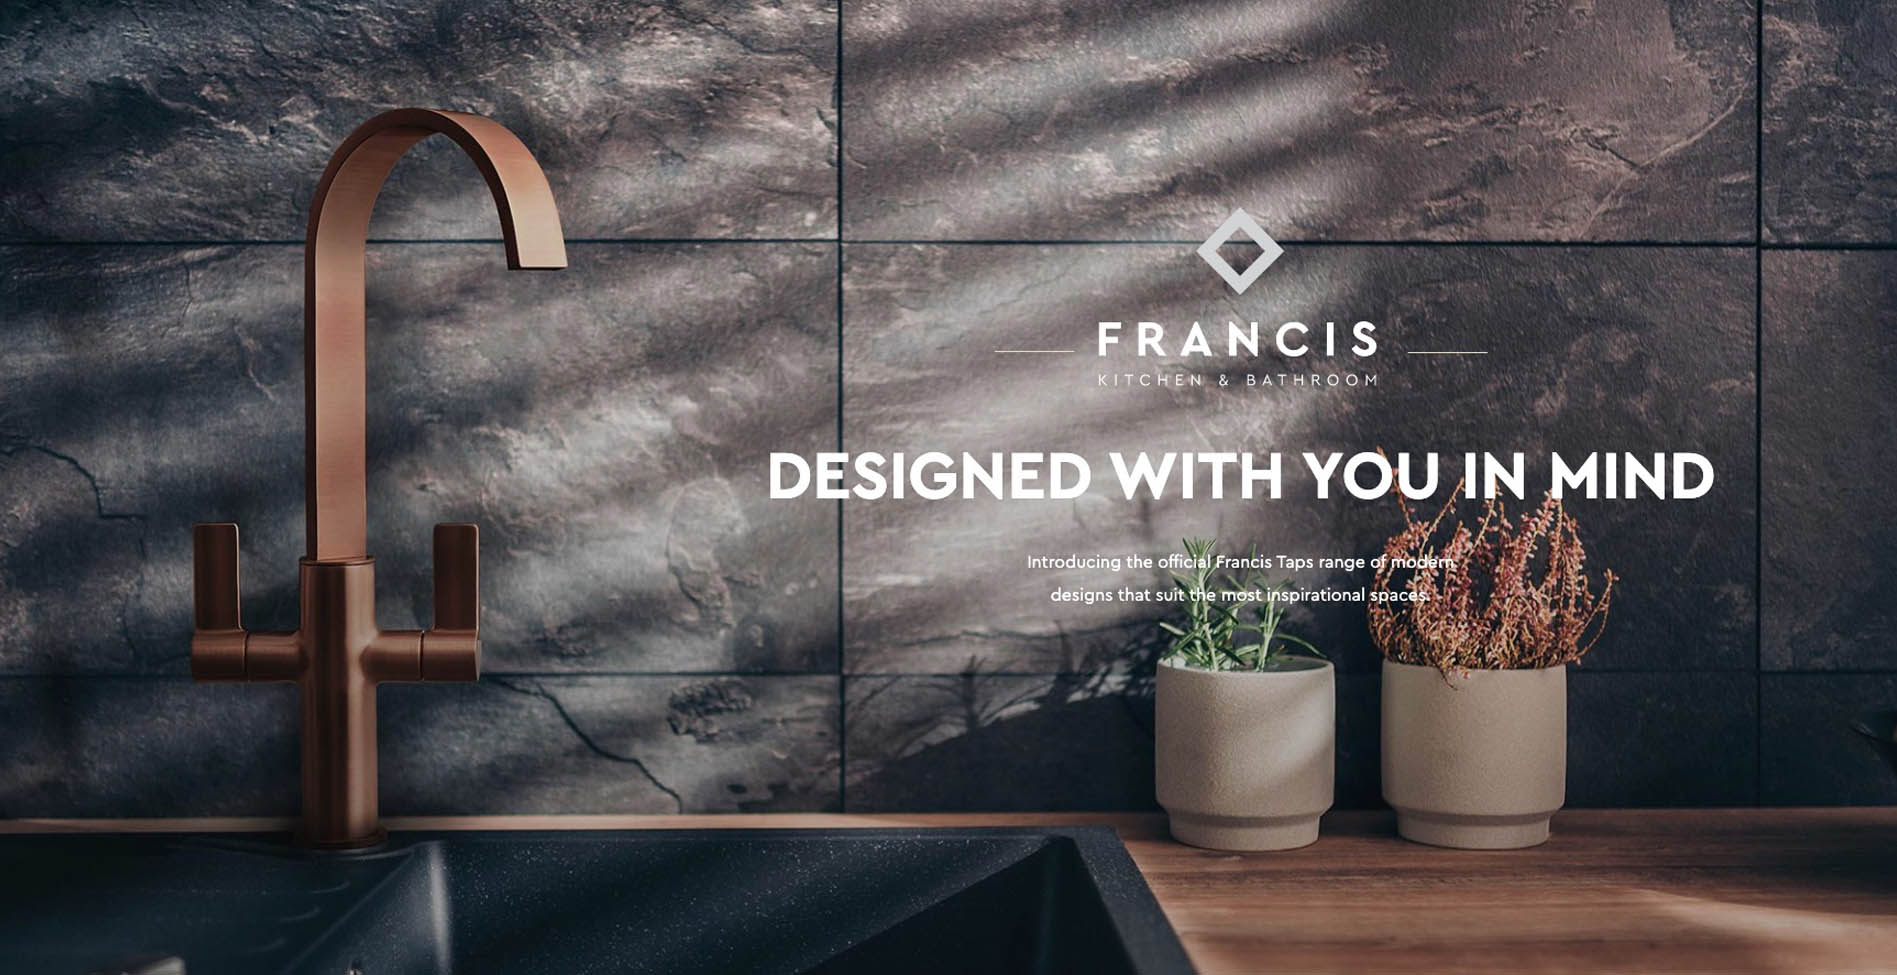 Francis kitchen and bathroom. Designed with you in mind